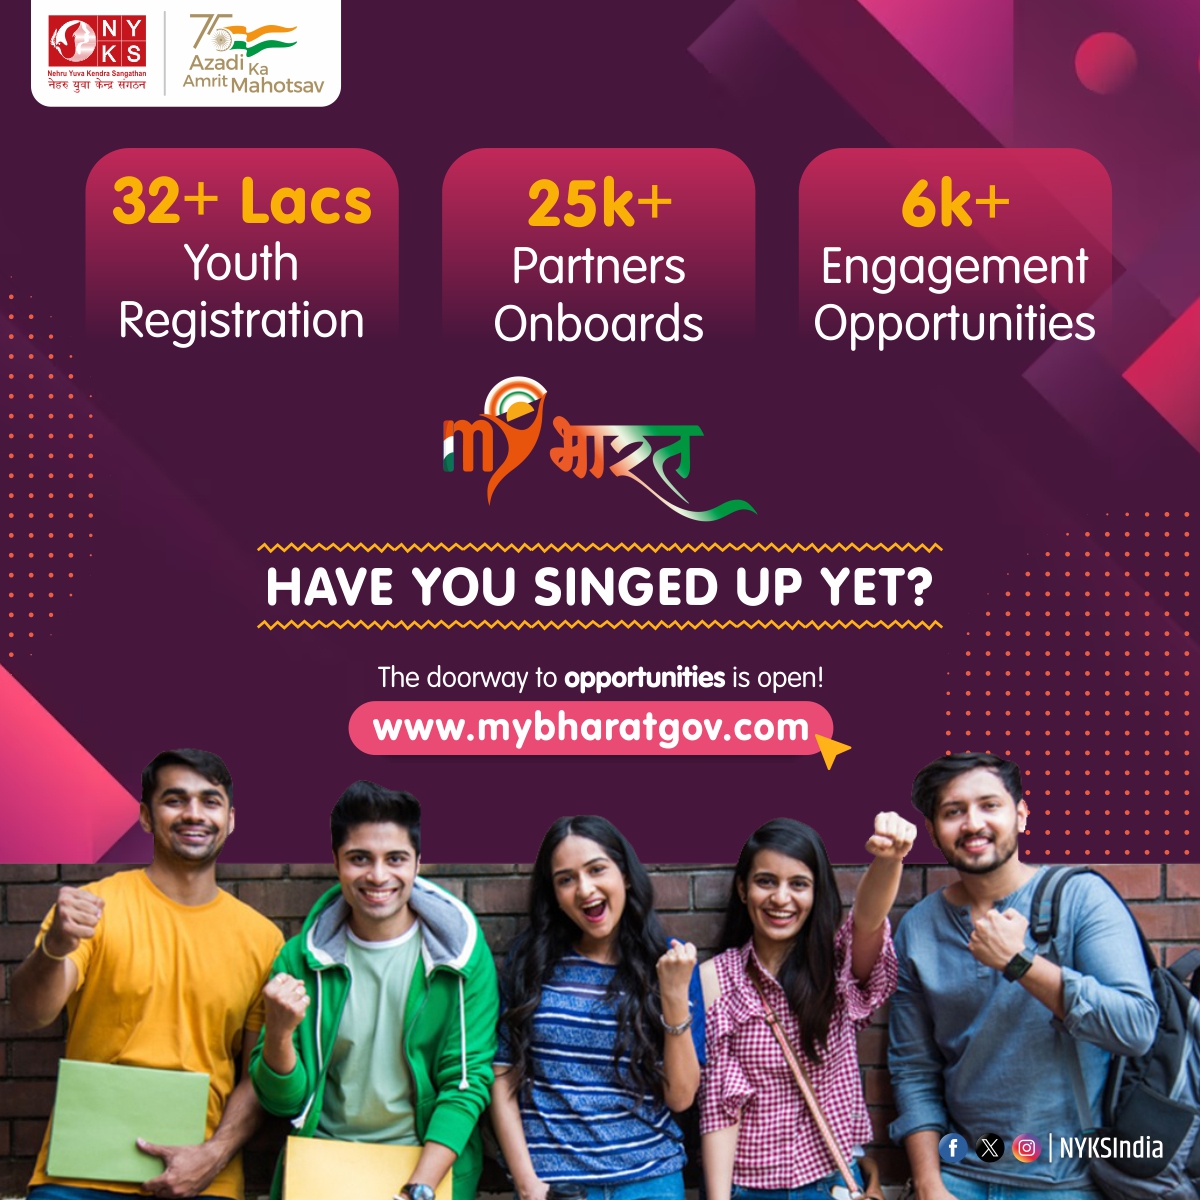 We are progressing towards establishing the foremost youth community in India. With over 32 lakh youth already registered on the #MYBharat portal and a growing network of 25k+ partners, our community continues to thrive. Register Here: mybharat.gov.in #MeraYuvaBharat